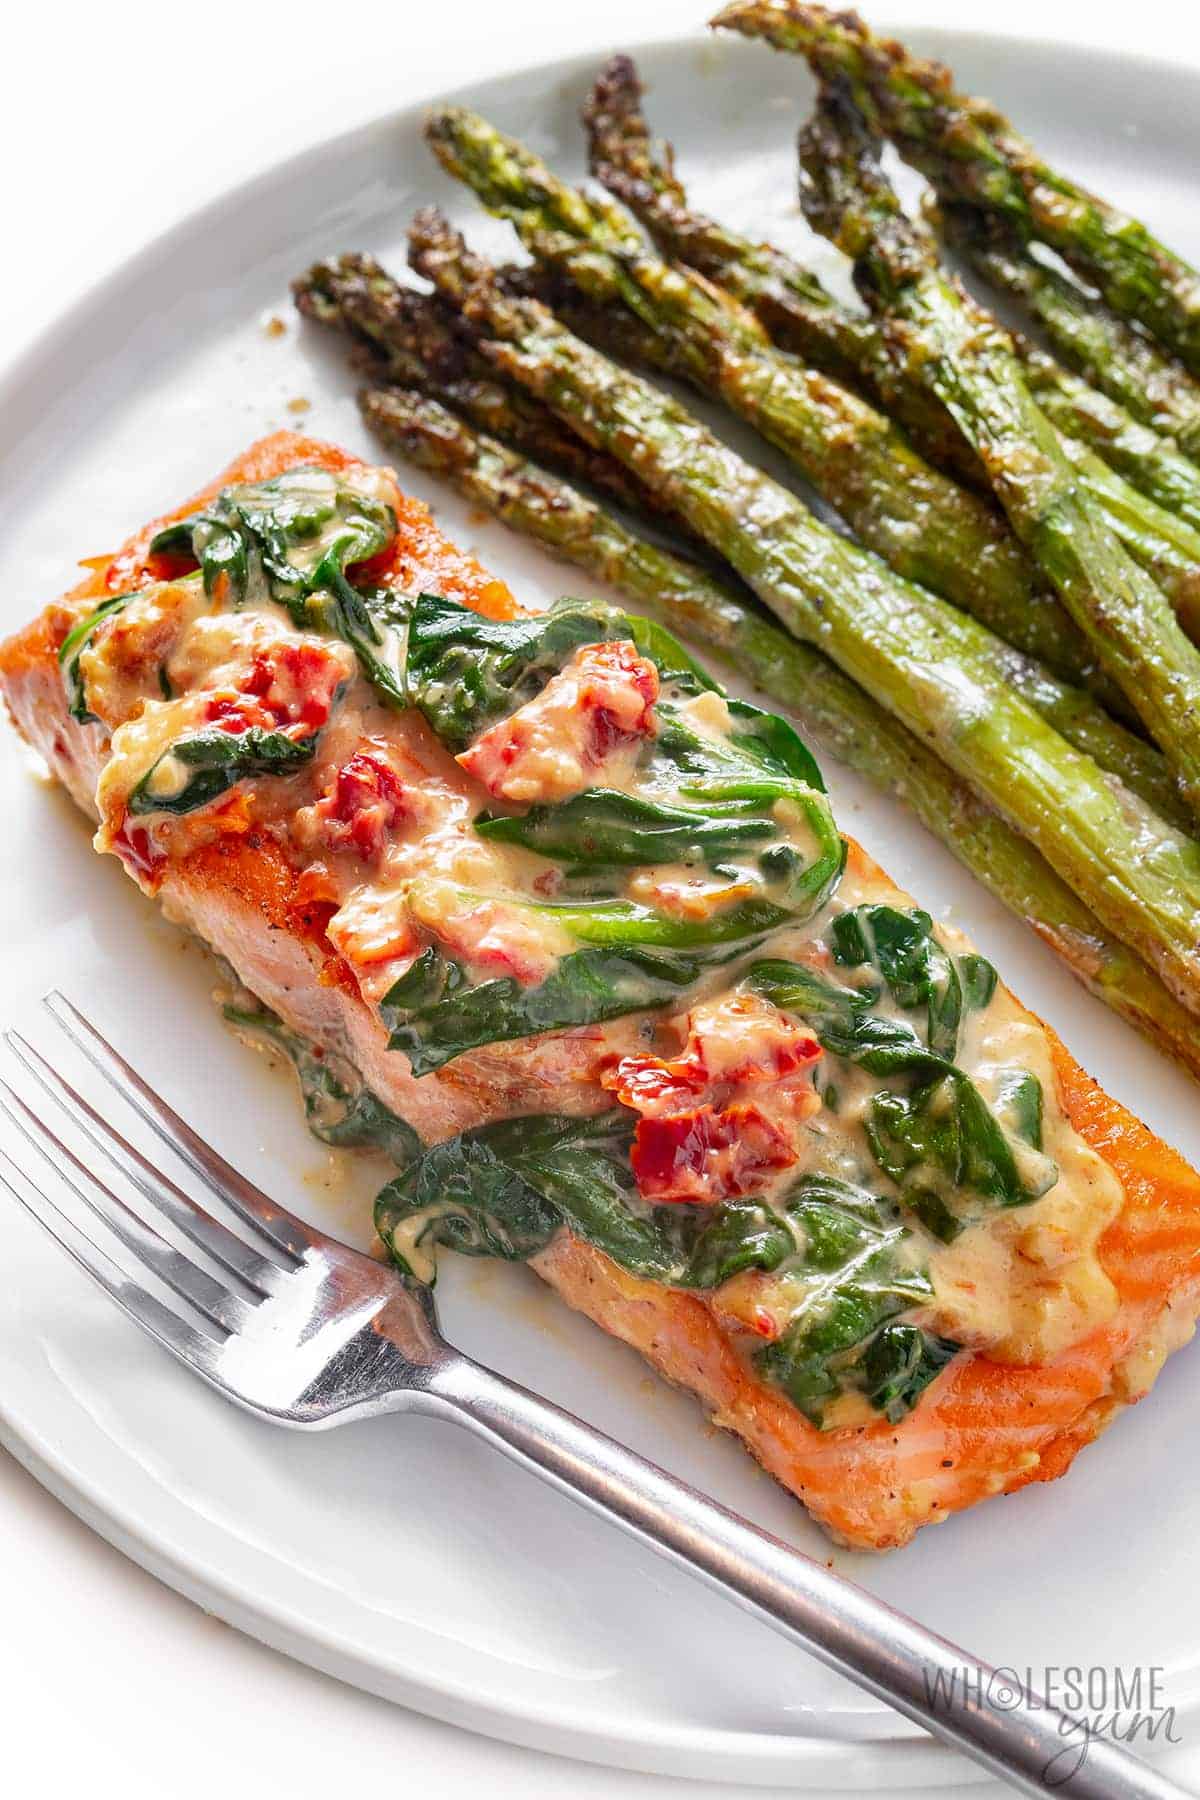 Creamy Tuscan salmon plated with sun-dried tomatoes and spinach.